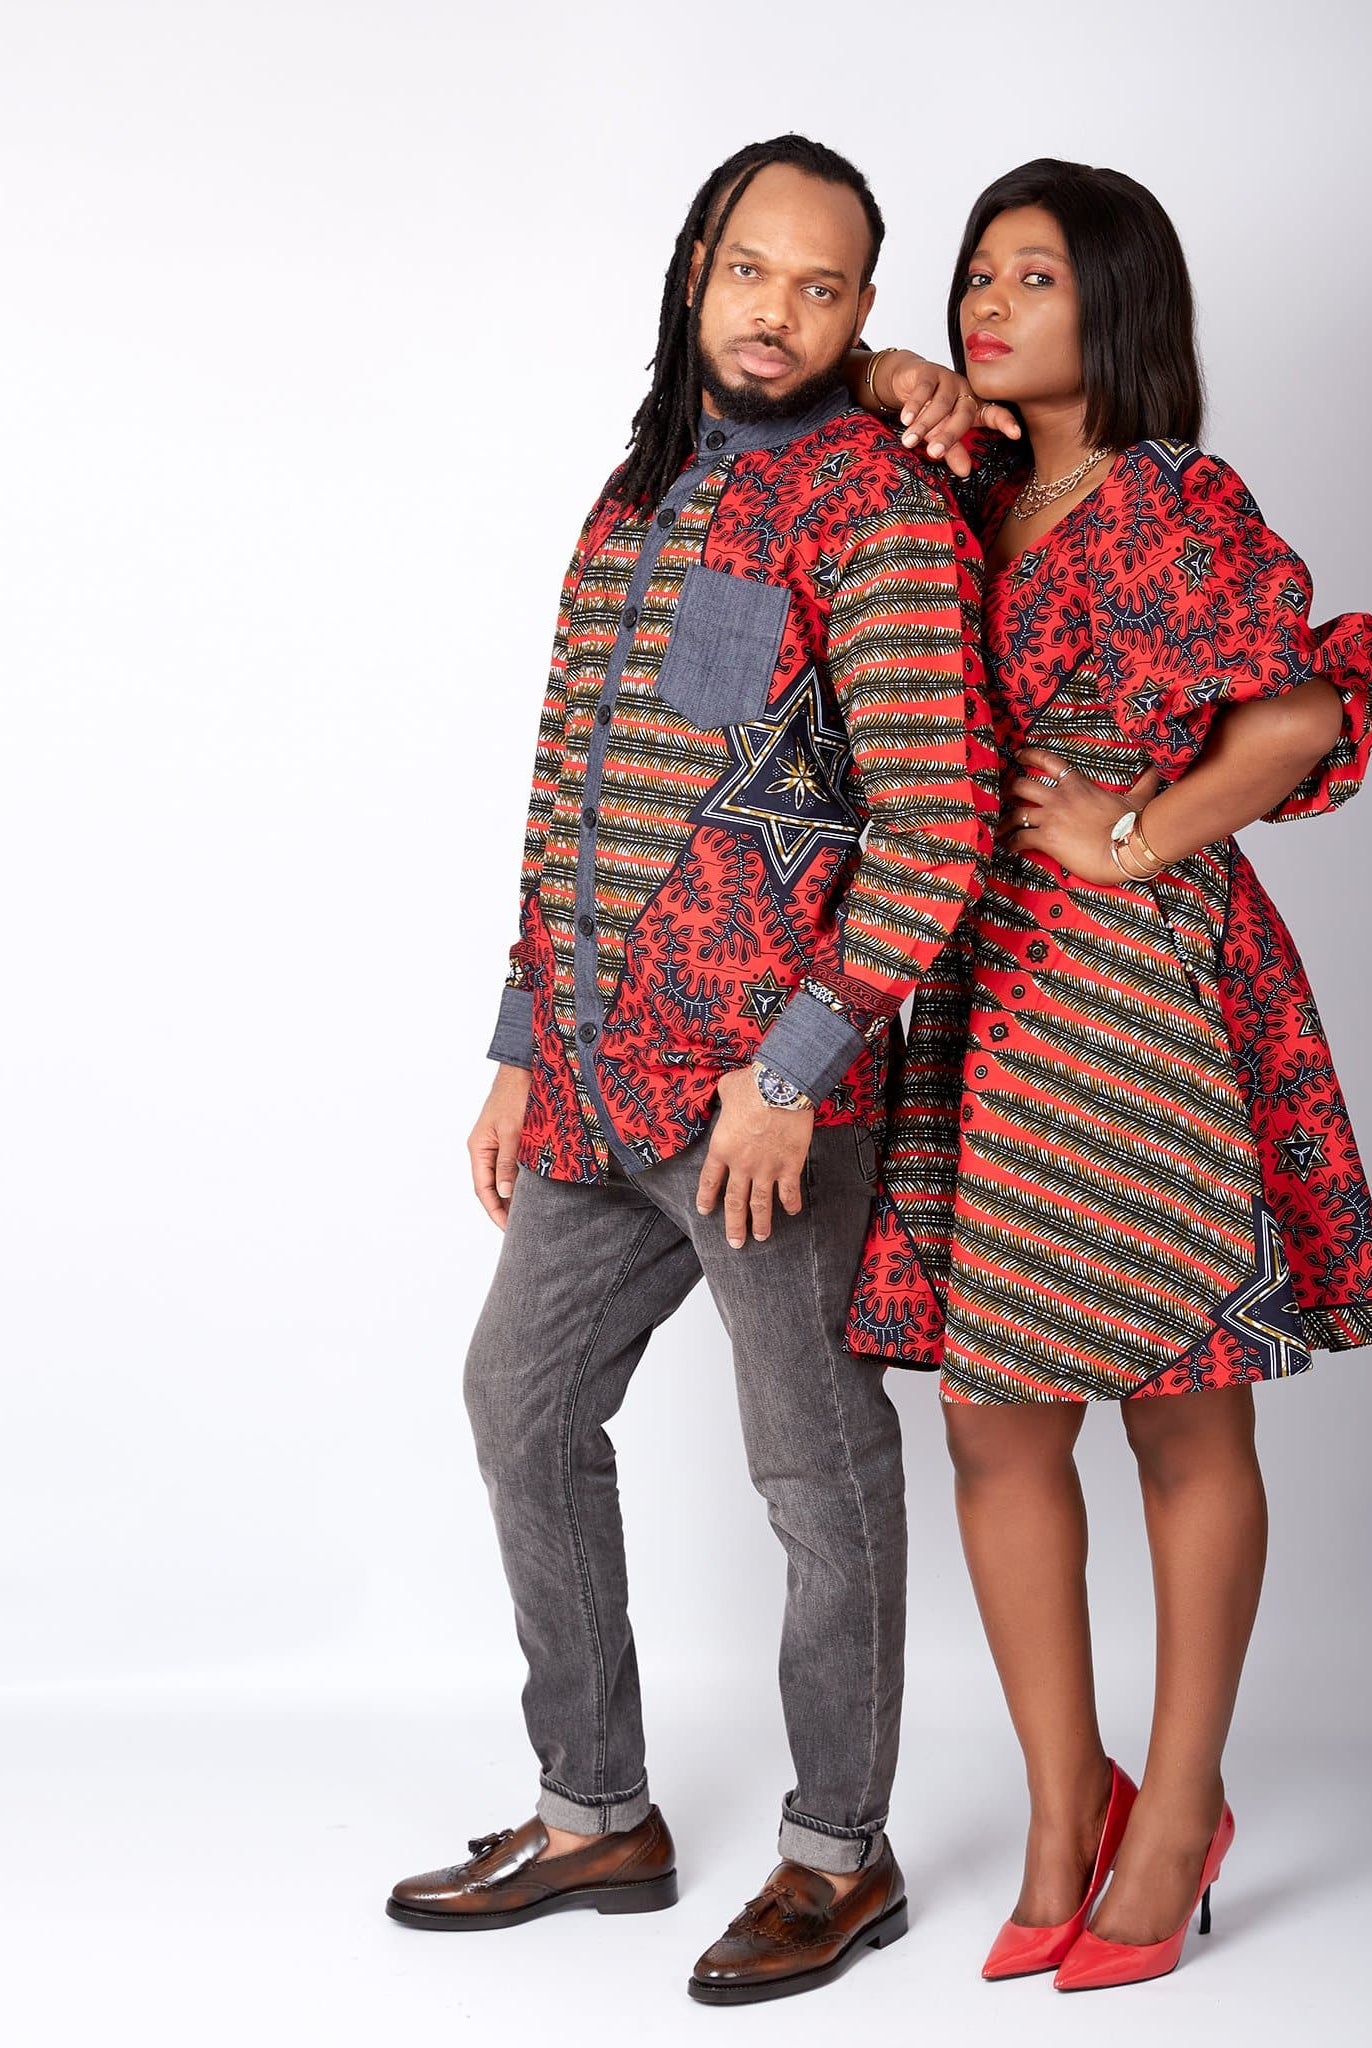 African clothing for men and women, Matching African print Clothing, His and Hers African apparel for special occasion